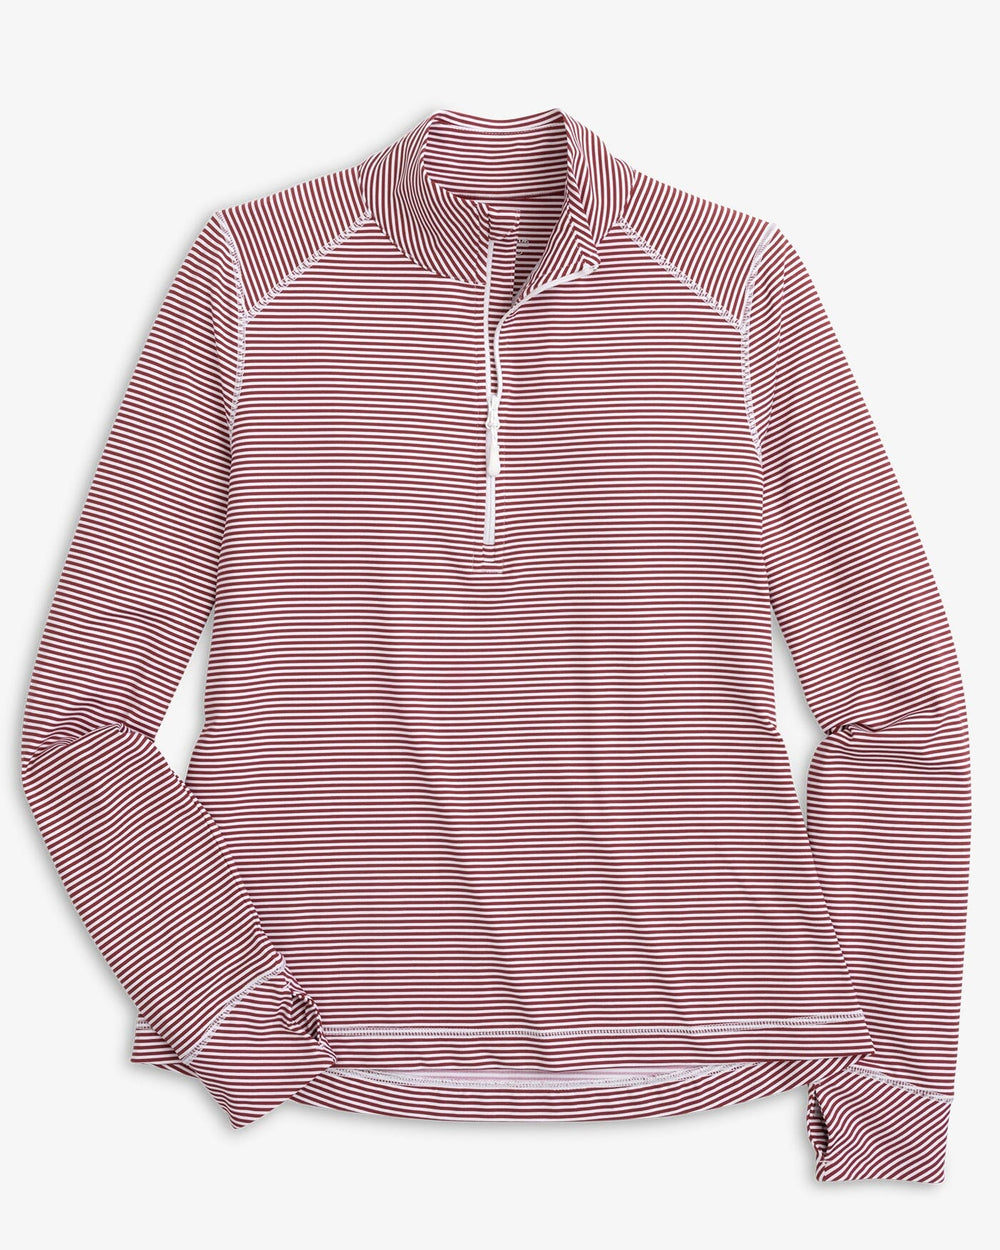 The front view of the Southern Tide Team Colors Runaround Quarter Zip Pull Over by Southern Tide - Chianti